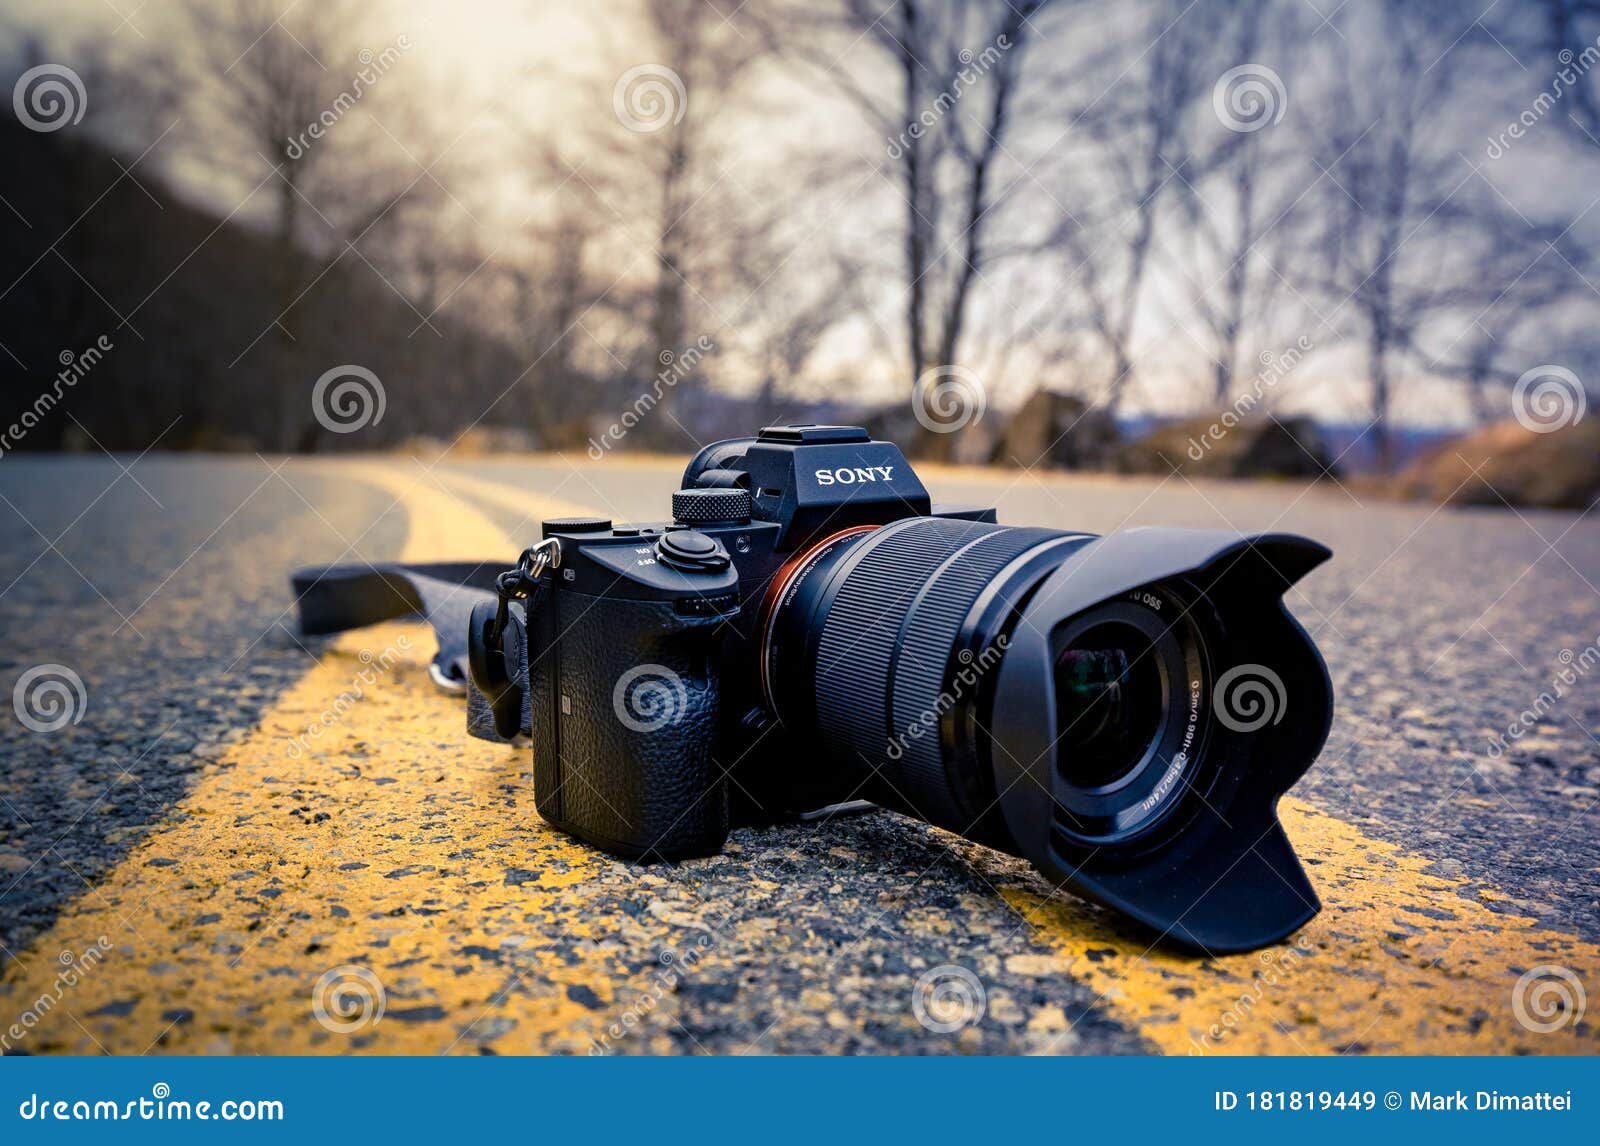 Sony Camera Sitting in the Middle of the Road Editorial Stock ...